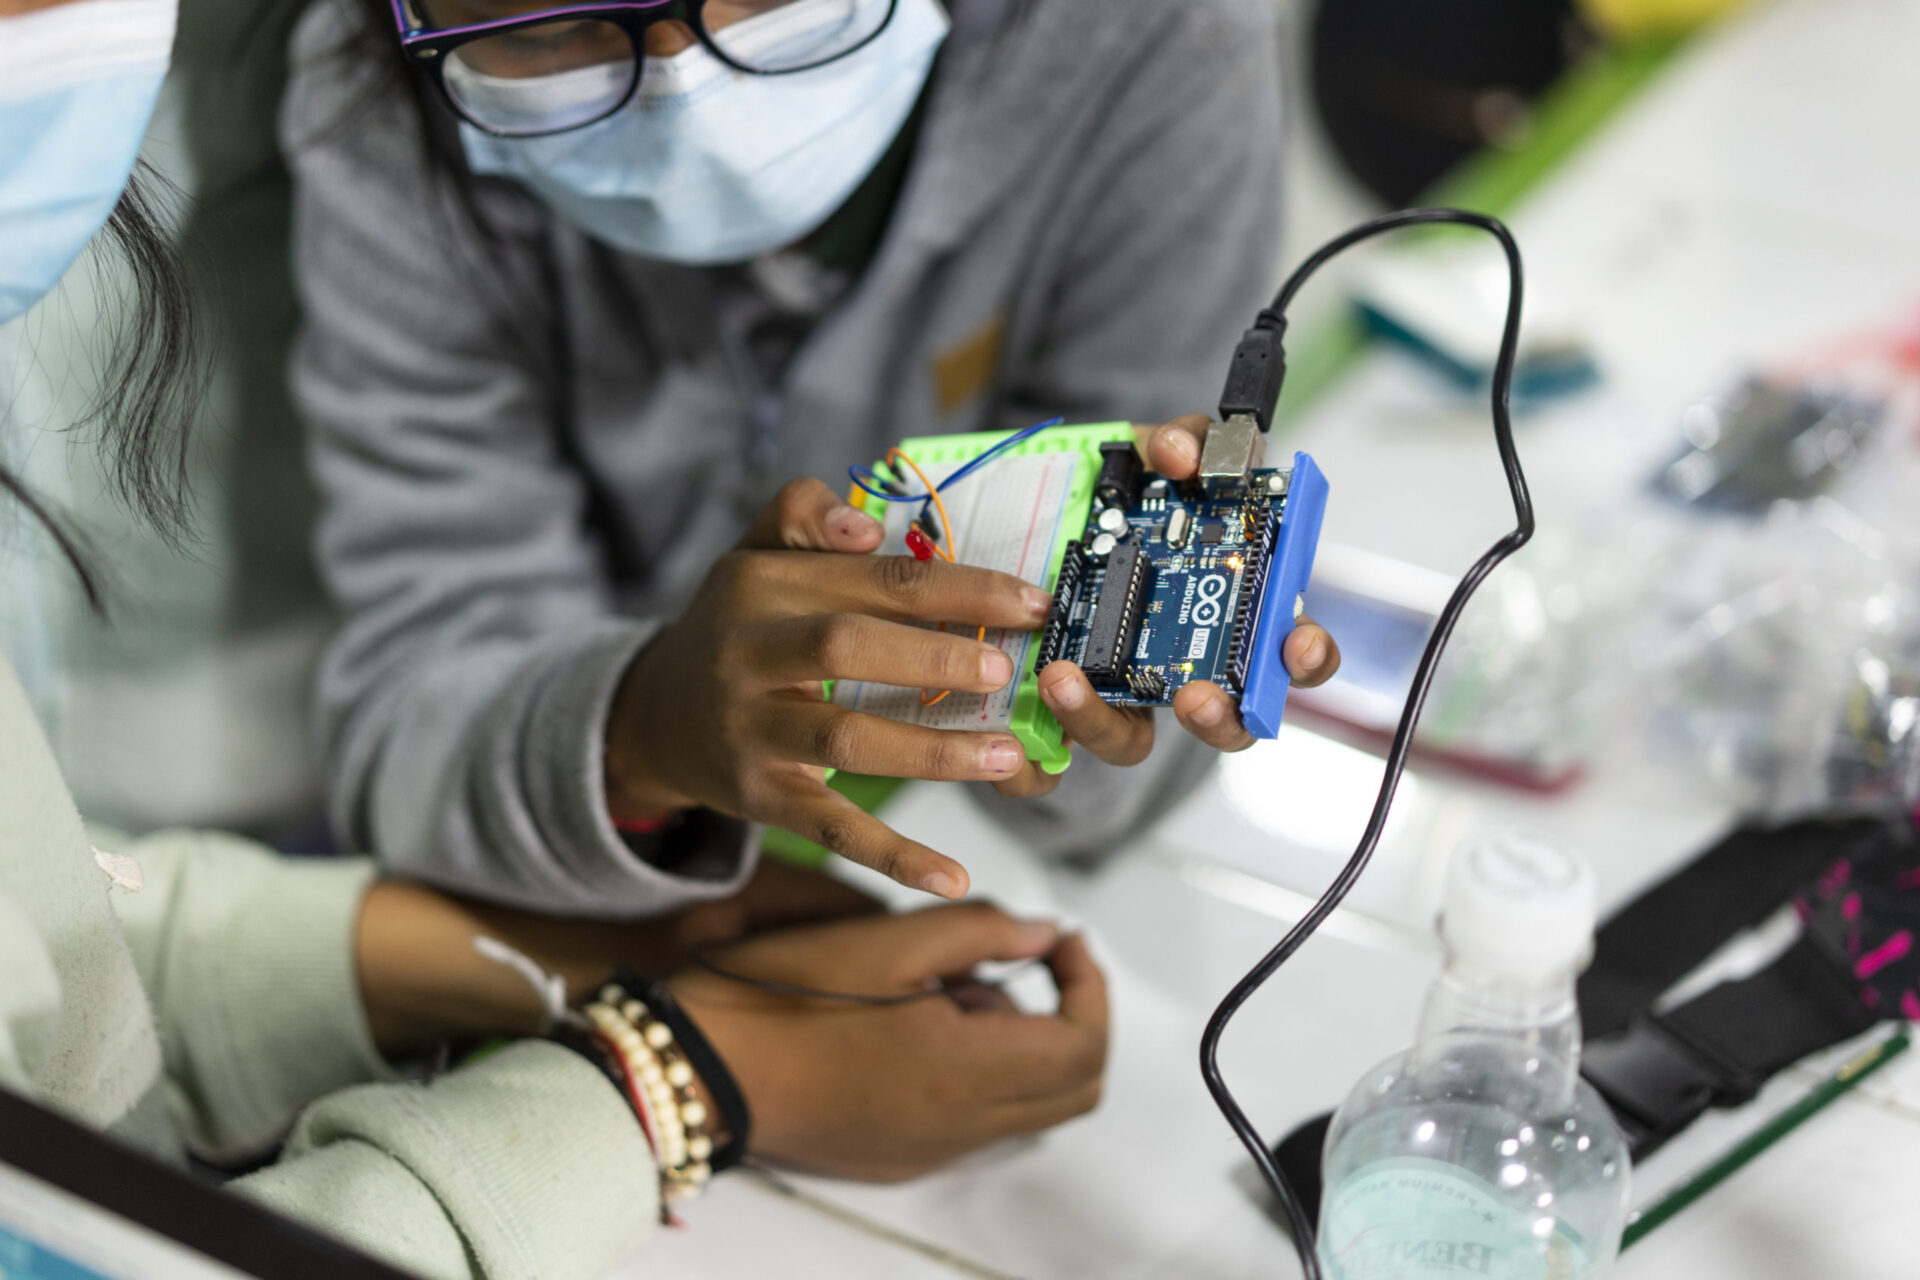 <p>Children and young people from Toconao, San Pedro de Atacama and Calama are part of this initiative that seeks to promote the use of technology to solve social problems.</p>
<p>In the image, students from the four schools working in their first face-to-face workshop where they were able to start putting together Arduino pieces.</p>
